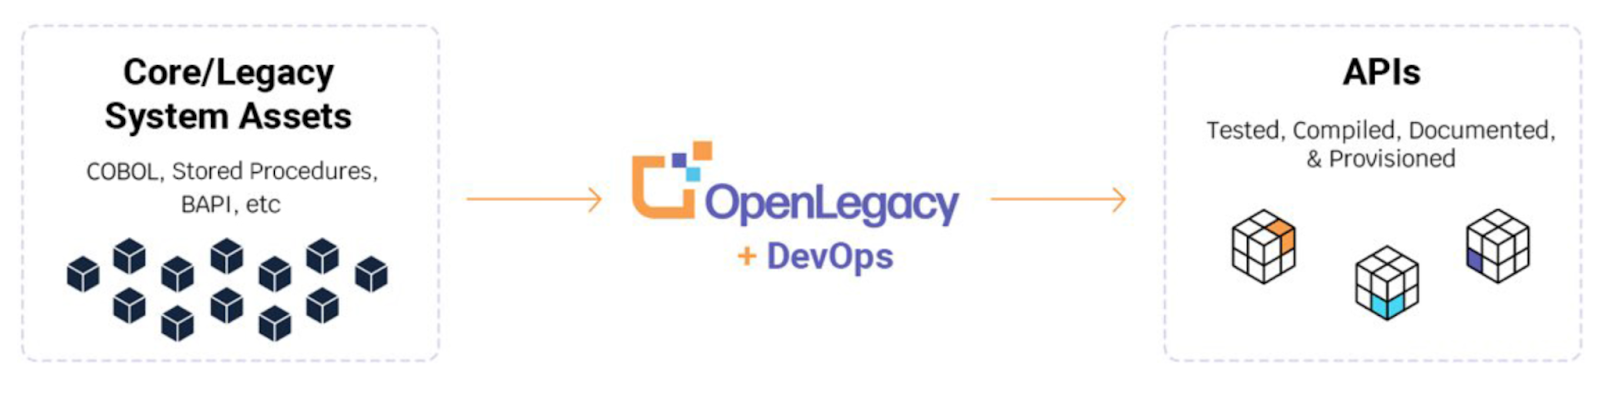 A graphic showing how OpenLegacy bridges the gap between core/legacy system assets using APIs.